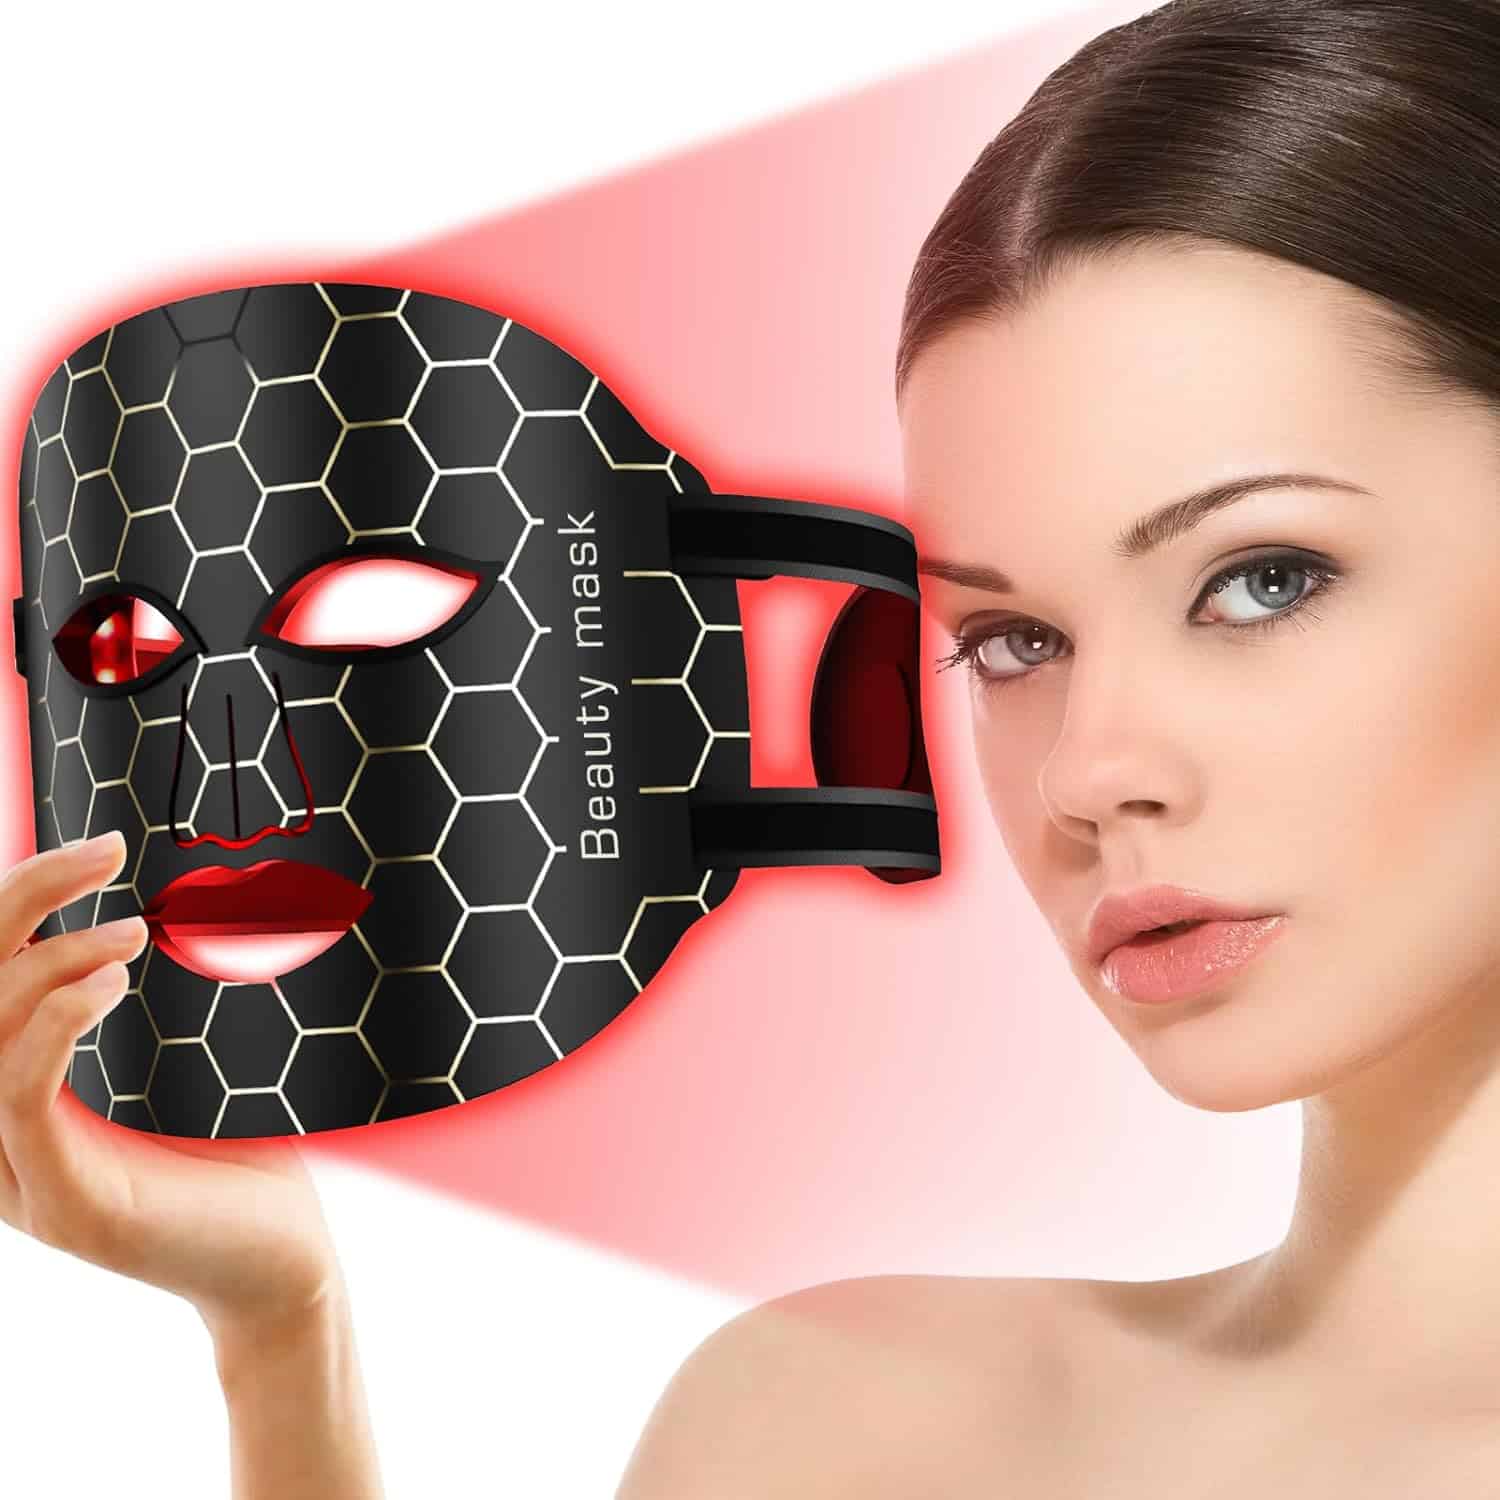 MDHAND Red Light Therapy For Face Review